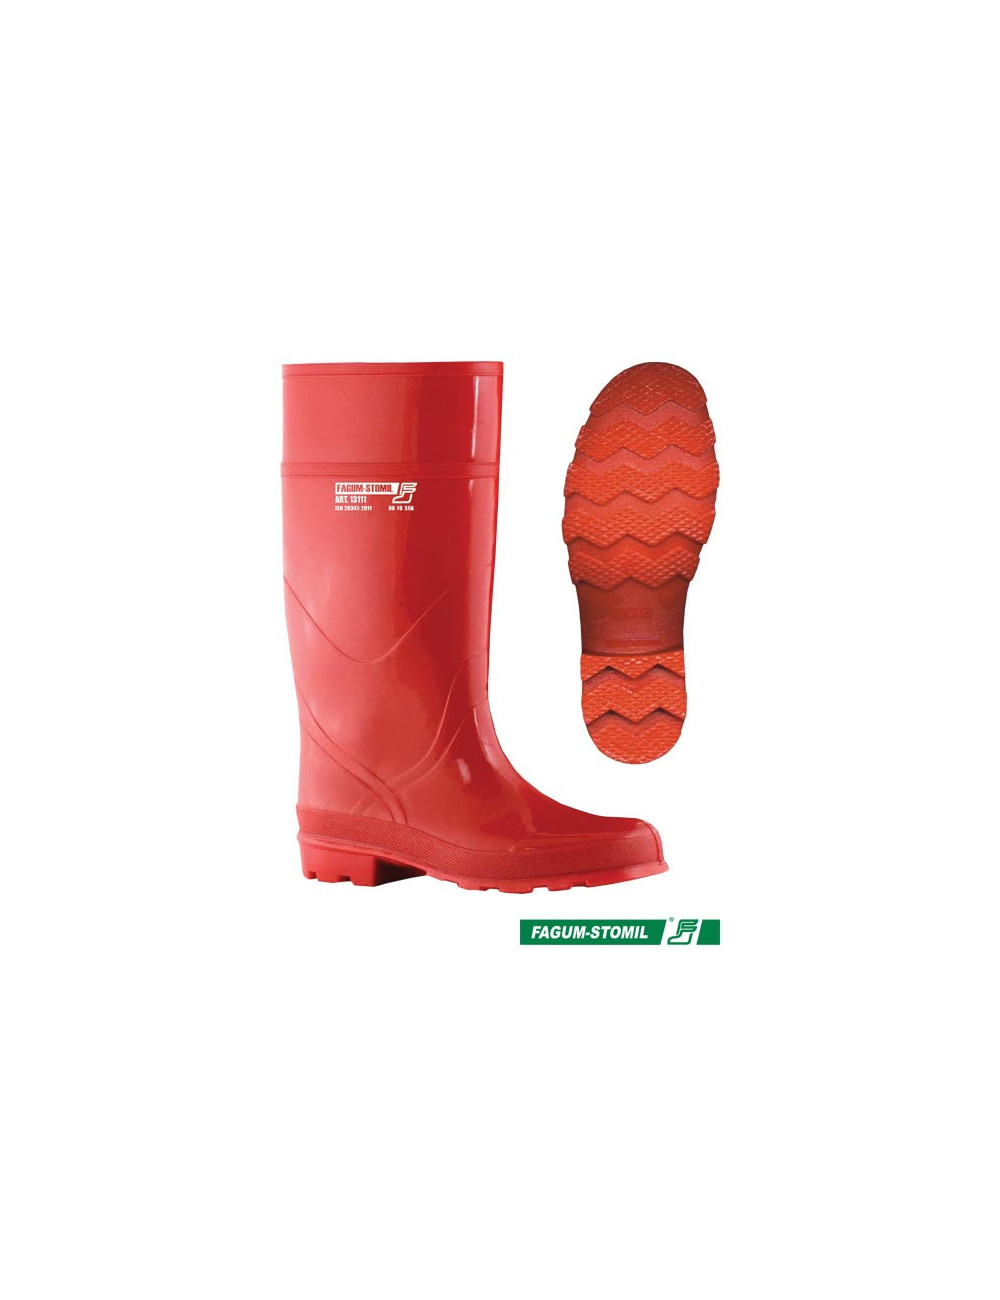 Occupational shoes bfkd13111 c red Fagum-stomil